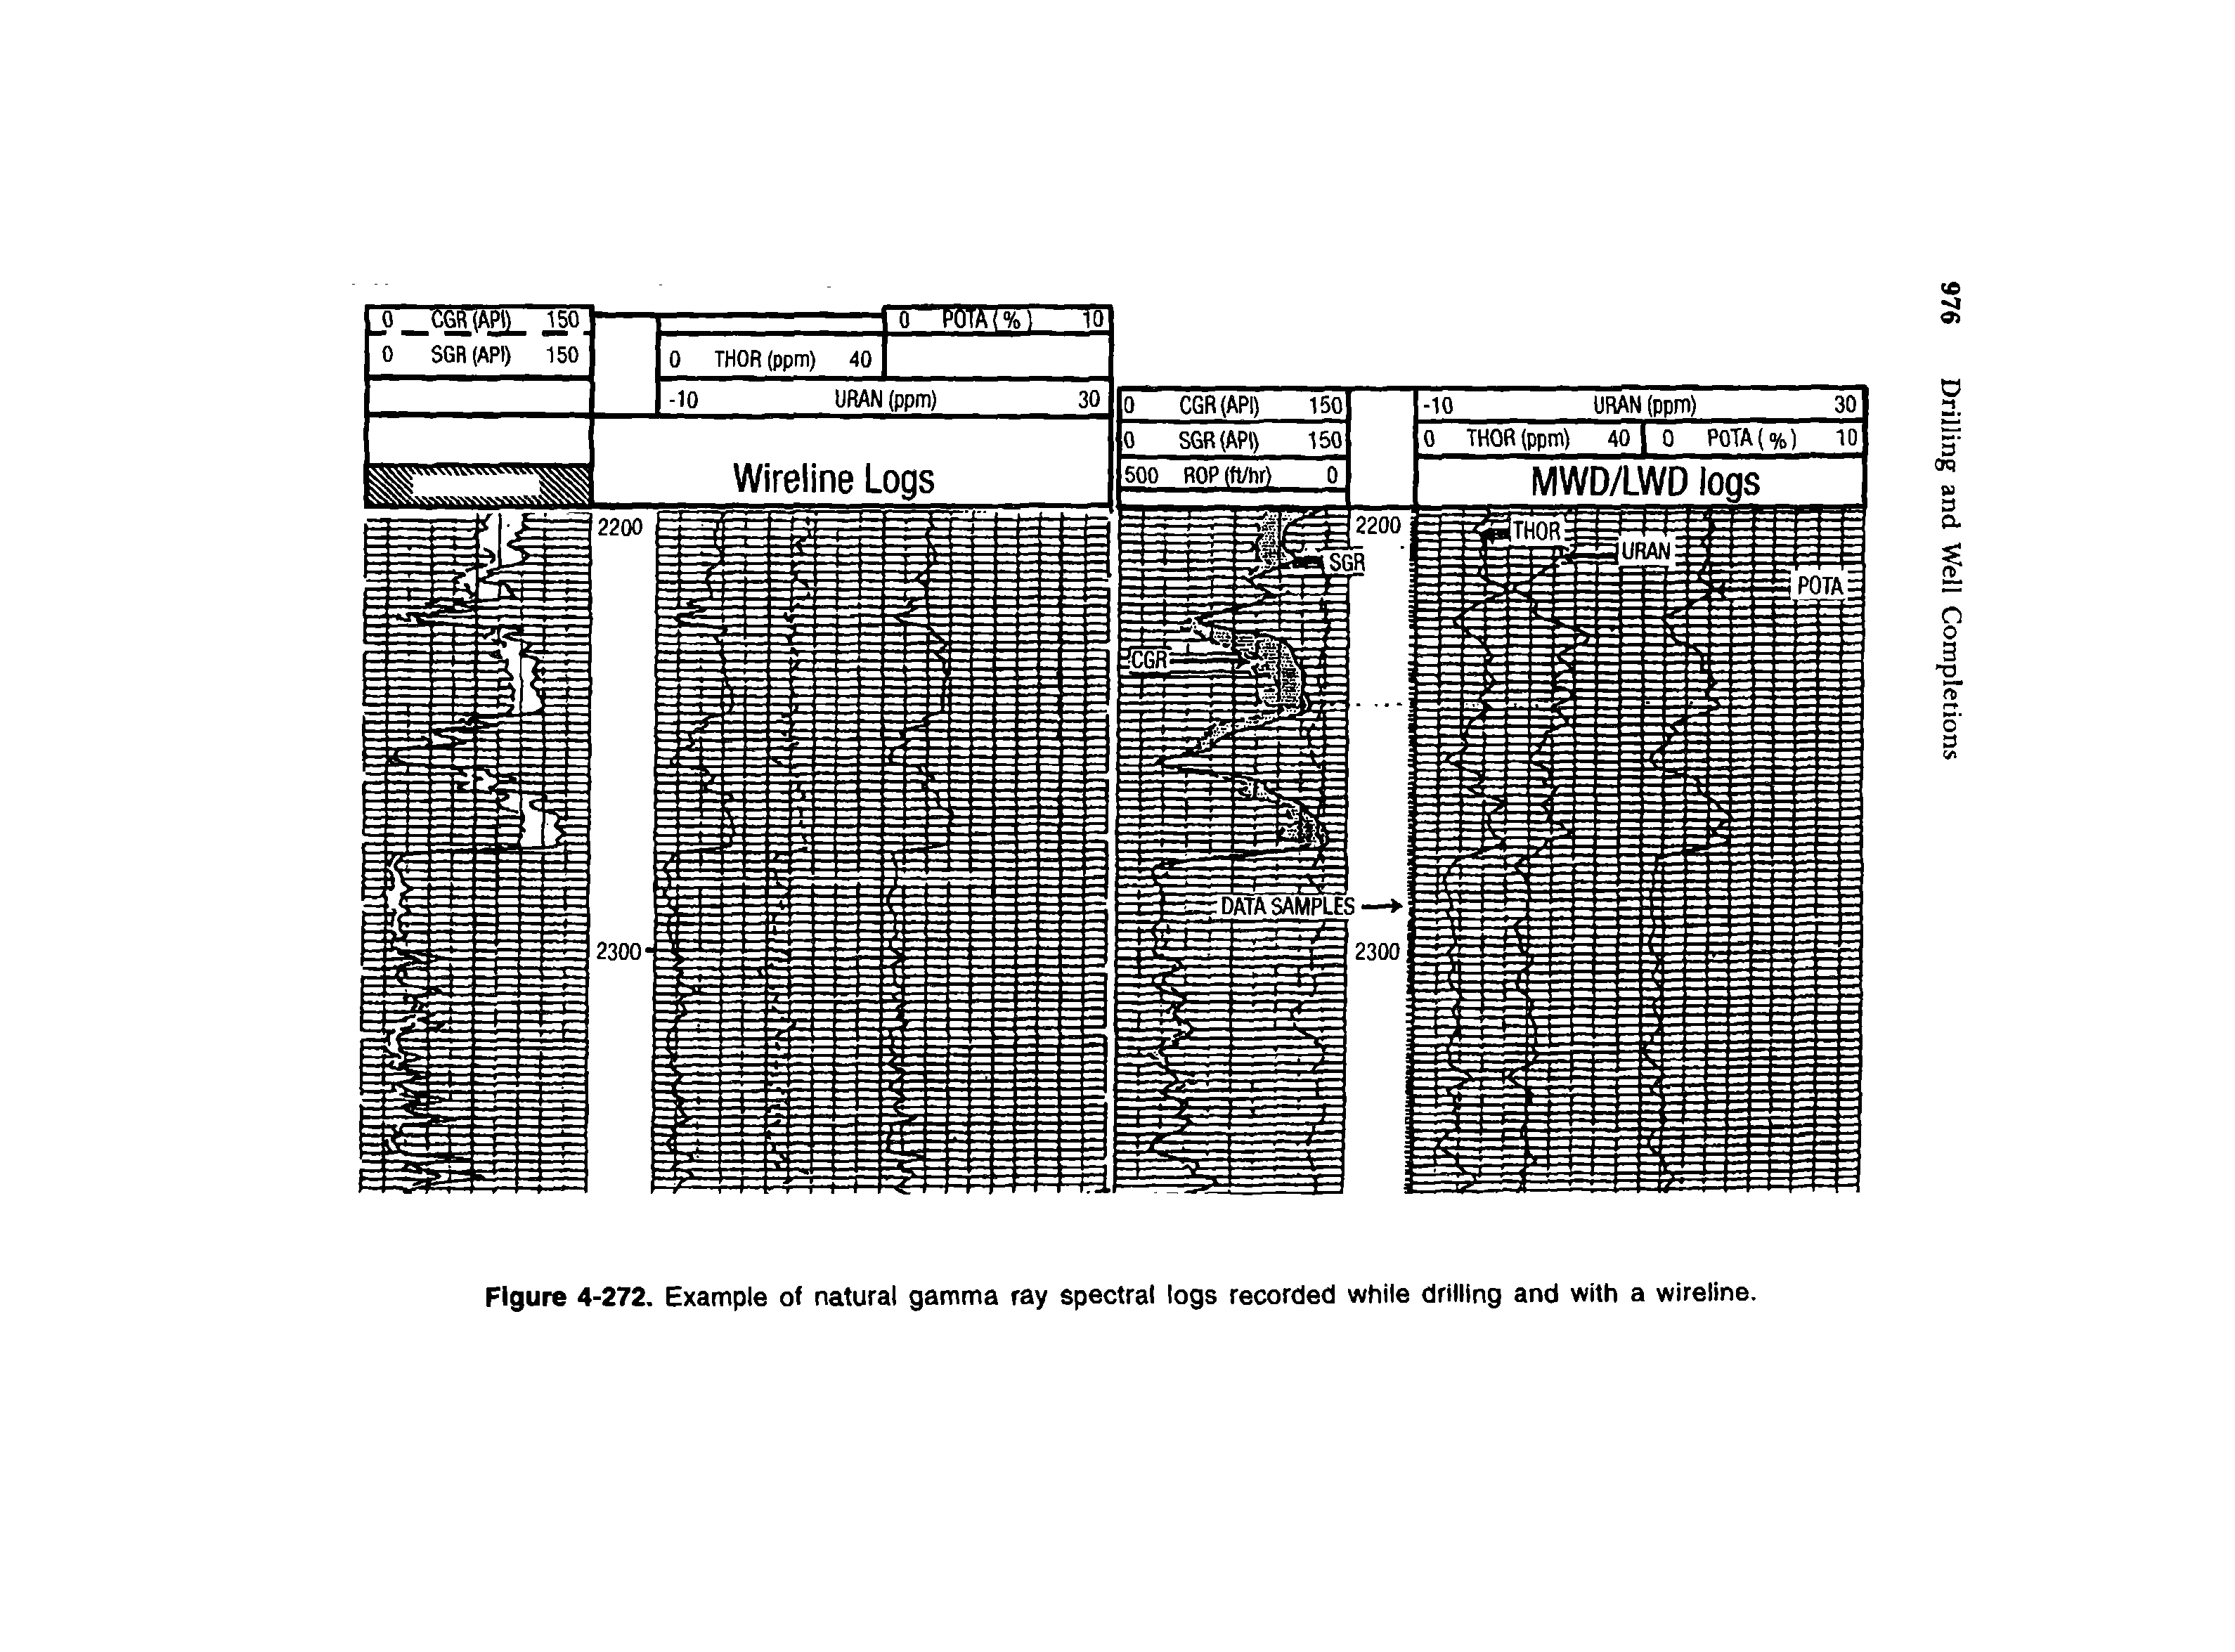 Figure 4-272. Example of natural gamma ray spectral logs recorded while drilling and with a wireline.